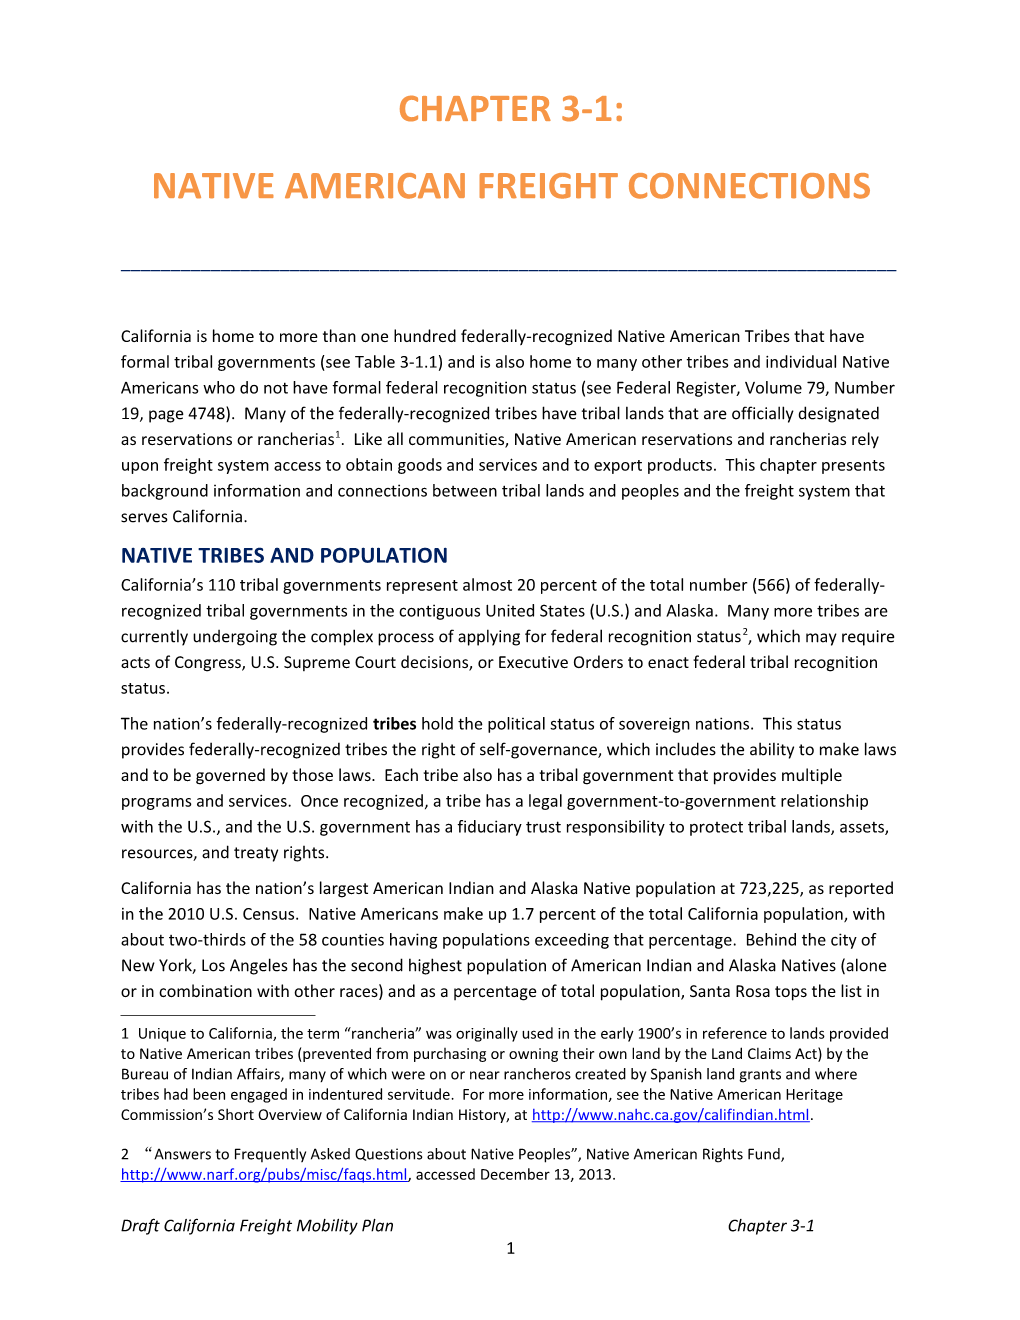 Native American Freight Connections